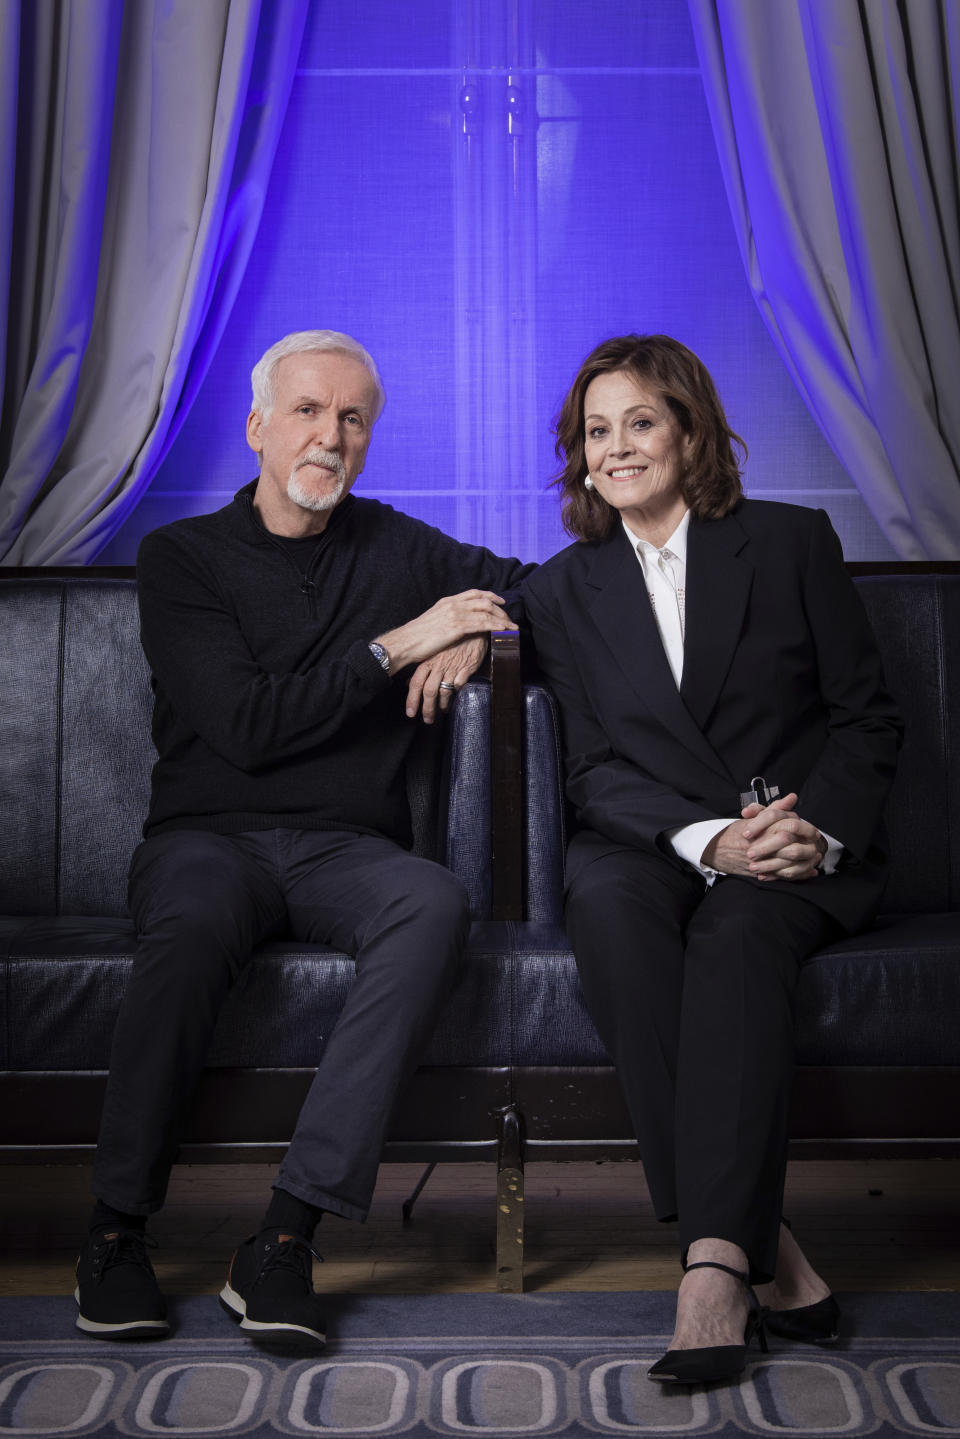 Director James Cameron, left, and Sigourney Weaver pose for a photo to promote the film "Avatar: The Way of Water" in London, Sunday, Dec. 4, 2022. (Photo by Vianney Le Caer/Invision/AP)